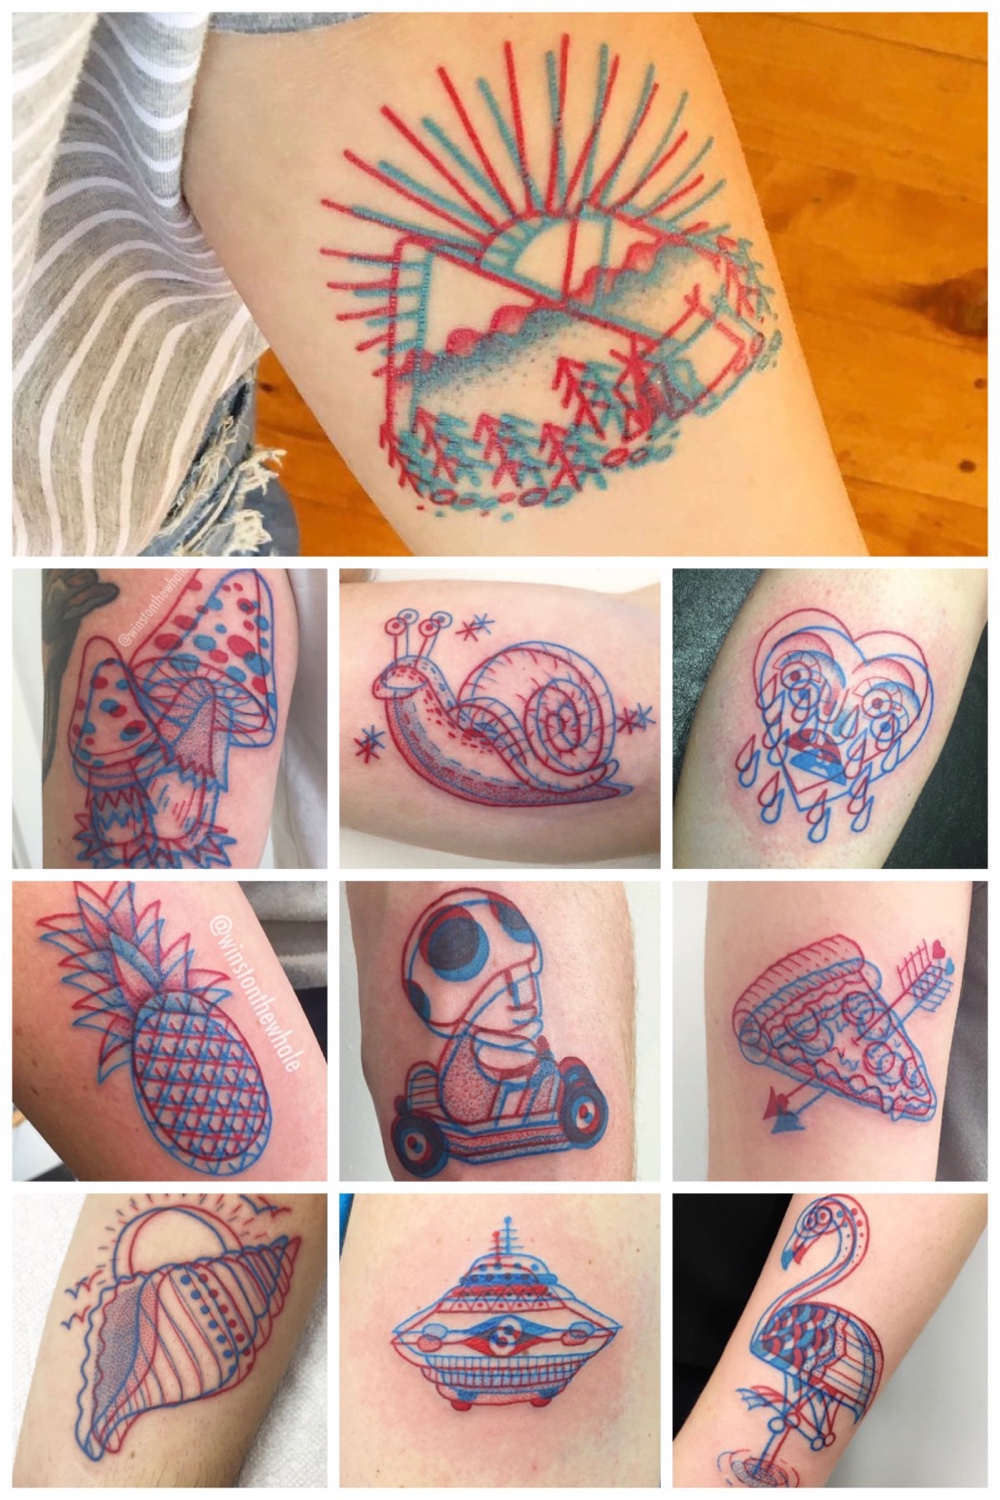 3d tattoo inspiration by Winston the Whale